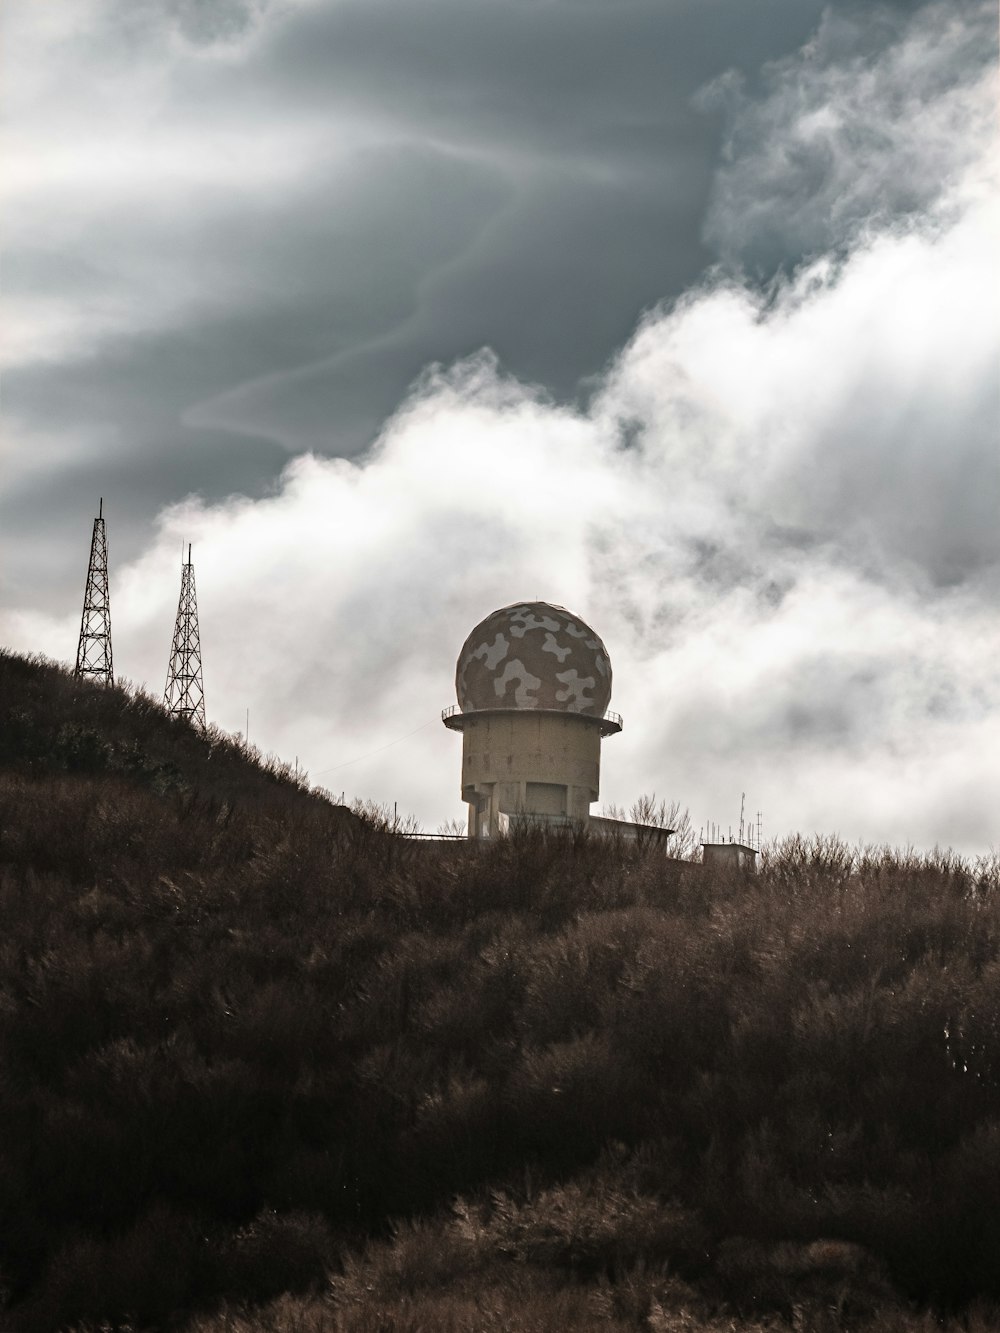 a satellite dish on top of a hill under a cloudy sky